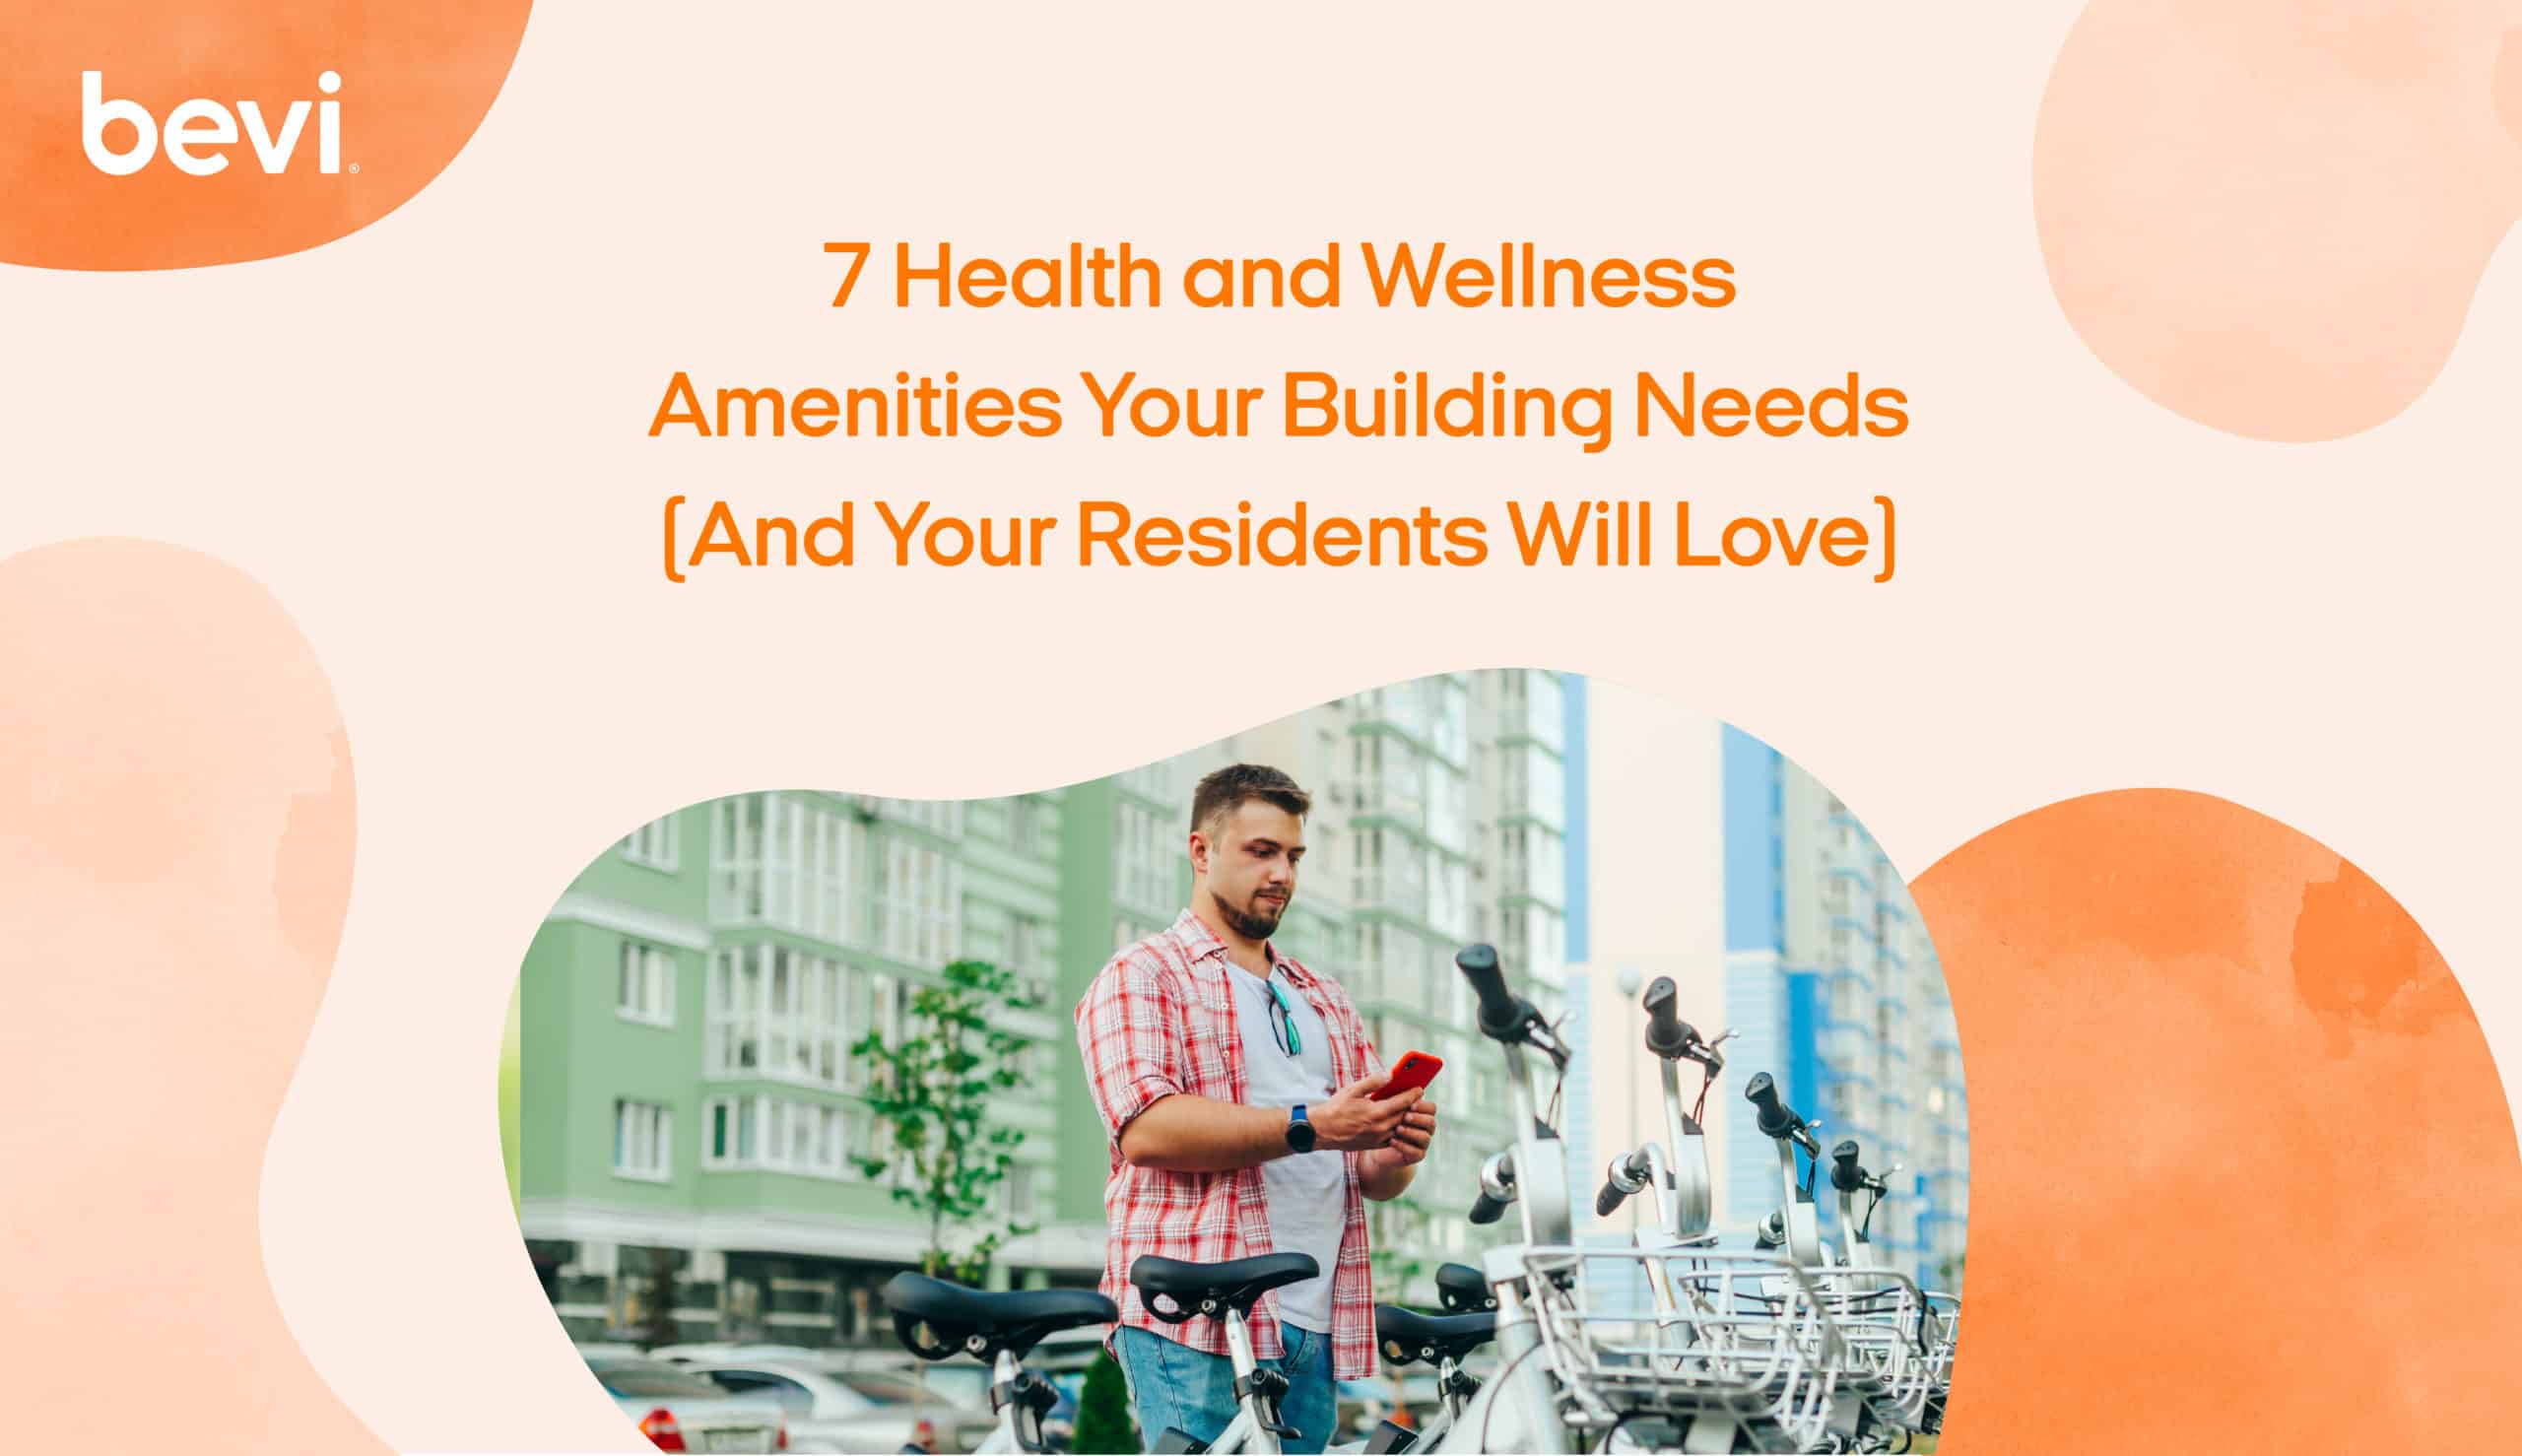 7 Health and Wellness Amenities Your Building Needs (And Your Residents Will Love)